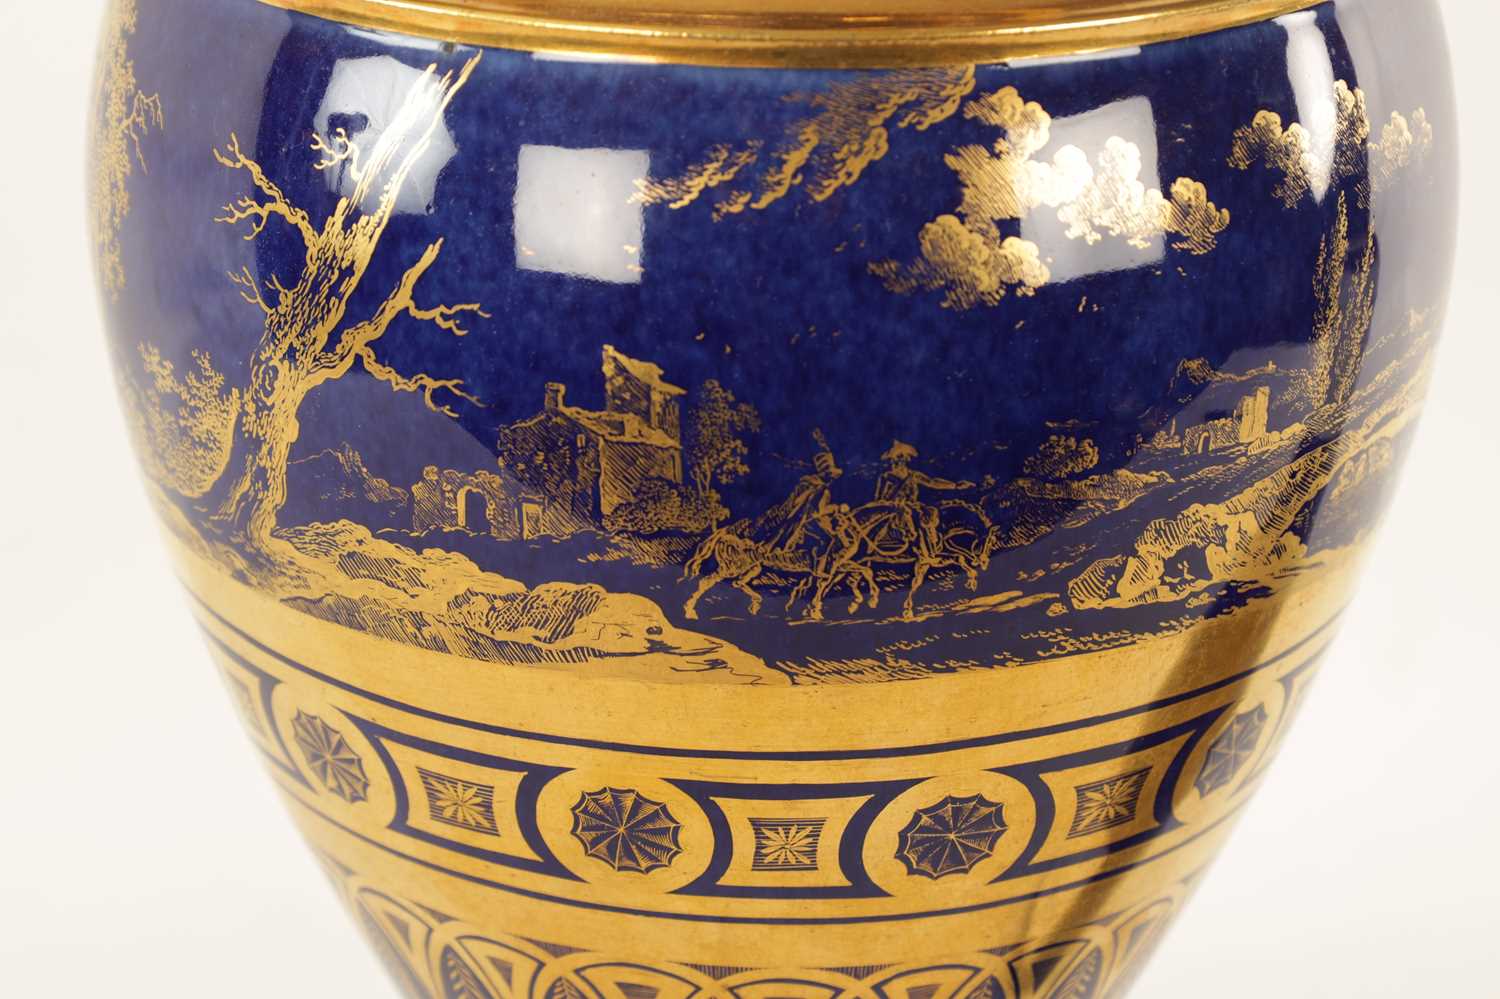 AN EARLY 19TH CENTURY FRENCH PARIS PORCELAIN ROYAL BLUE AND GILT URN SHAPED PEDESTAL VASE - Image 7 of 8